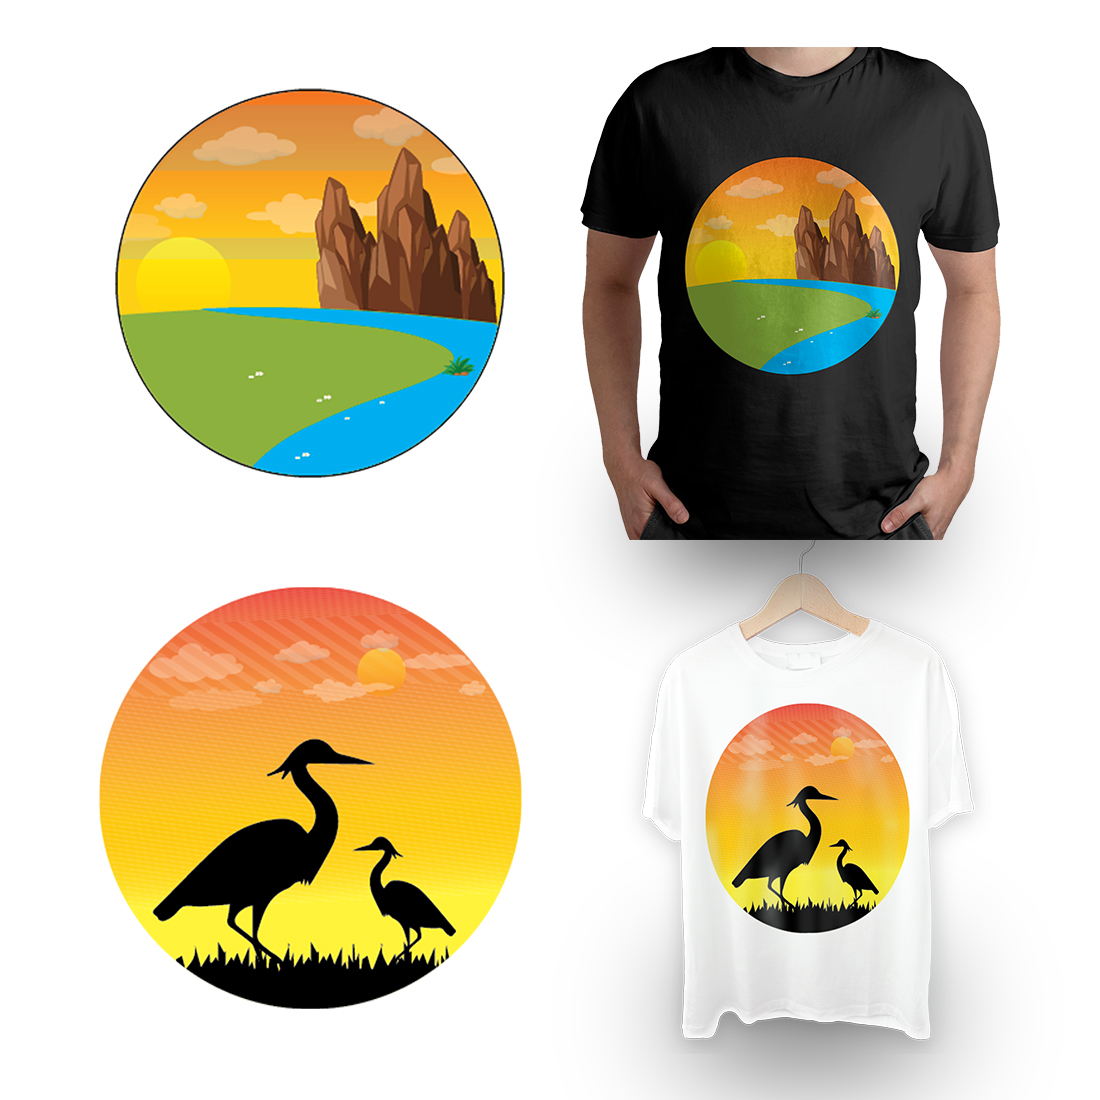 Summer T-Shirt Design Vector cover image.